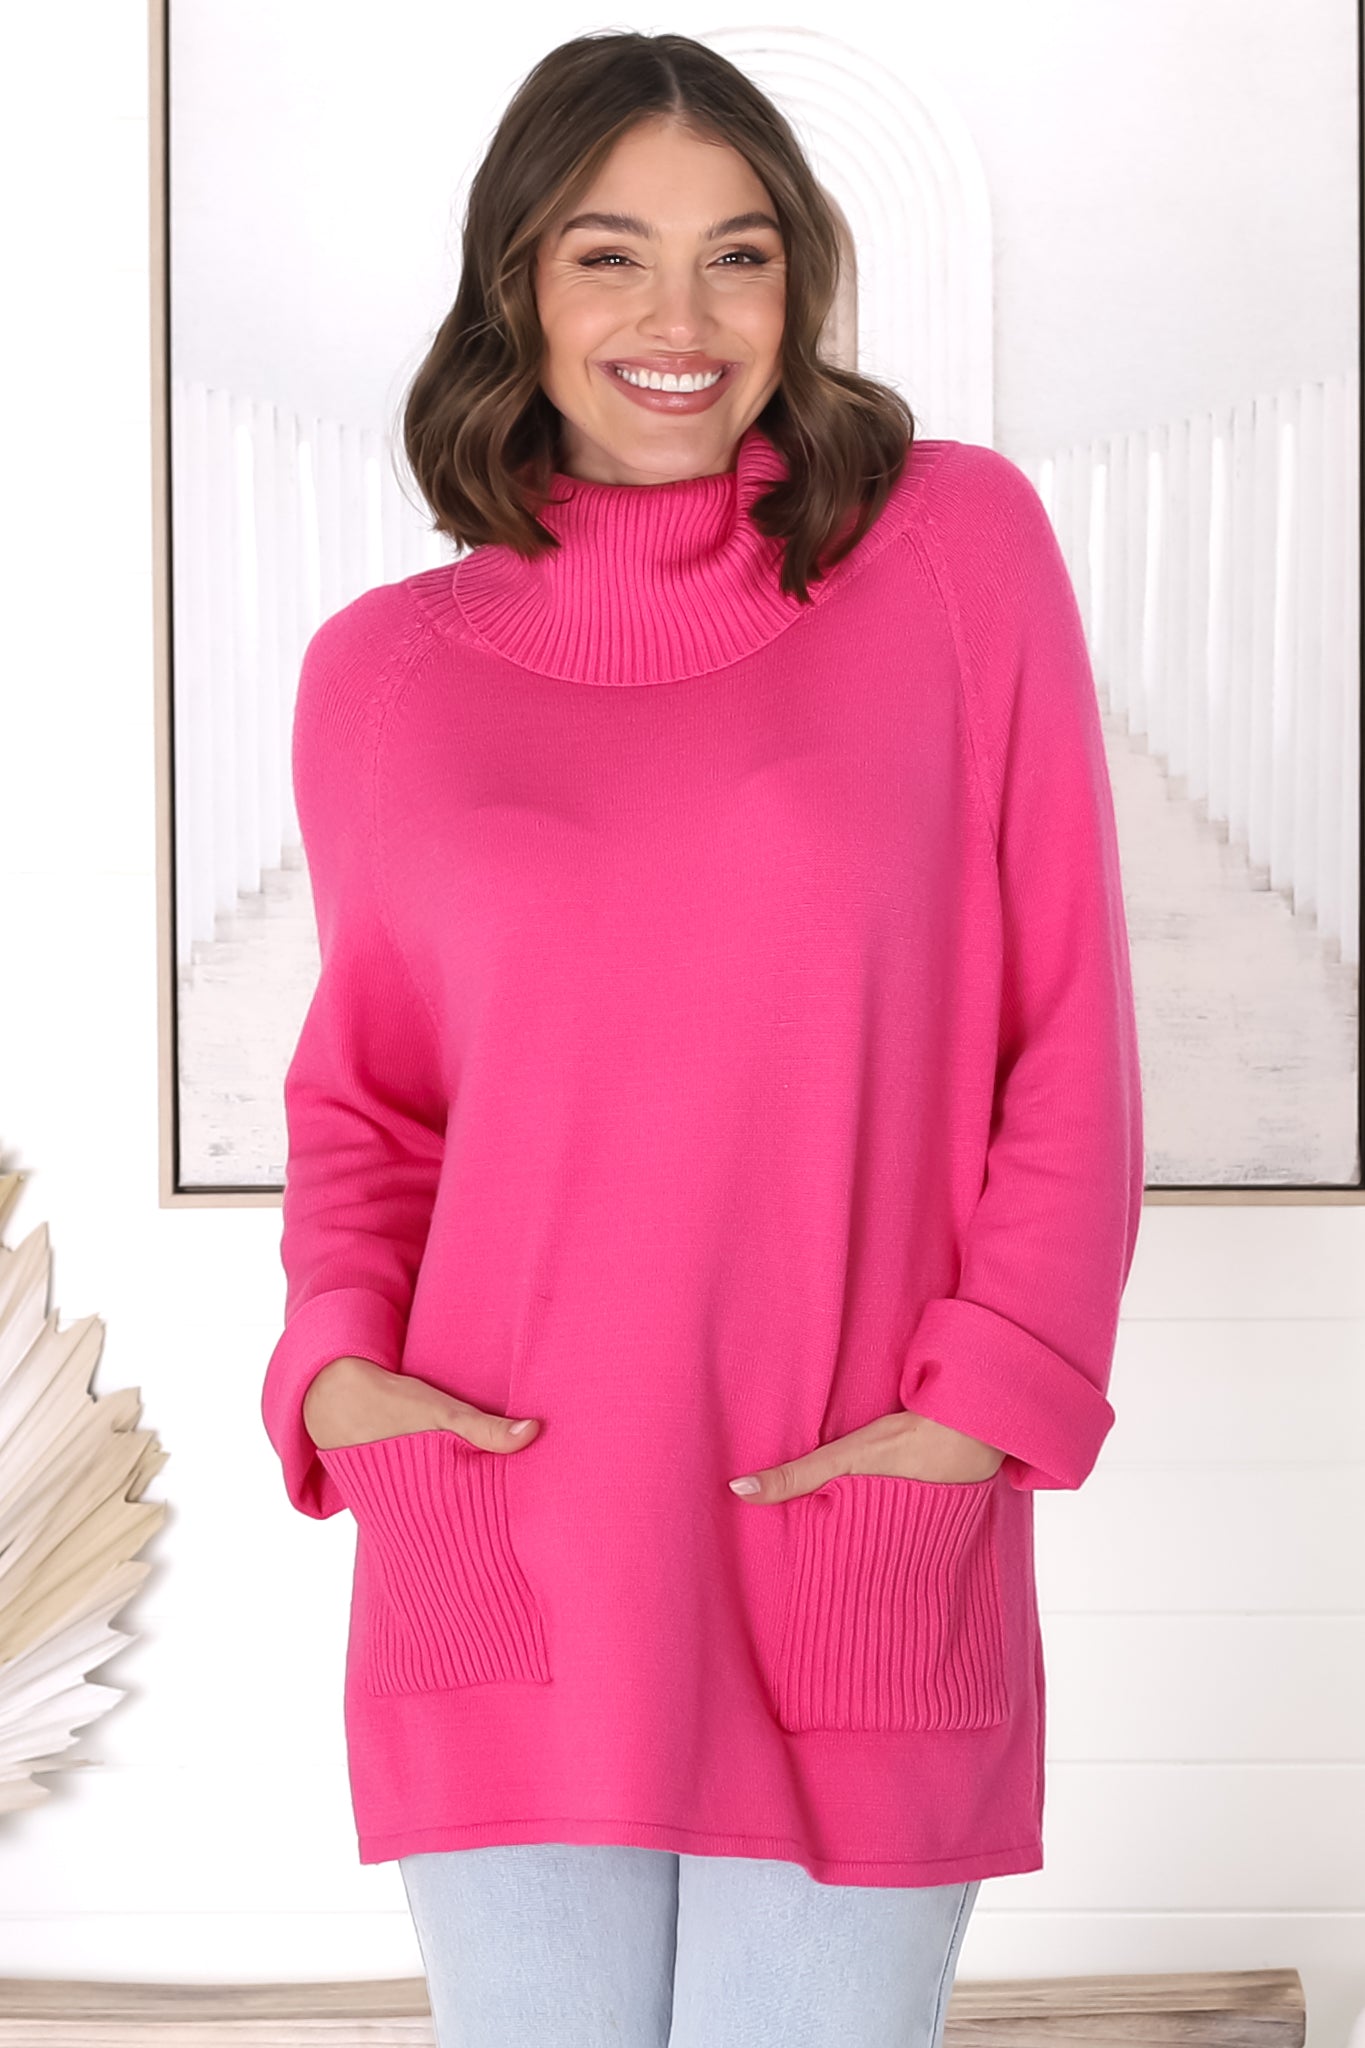 Ashby Jumper - Turtle Neck Relaxed Jumper with Pockets in Hot Pink